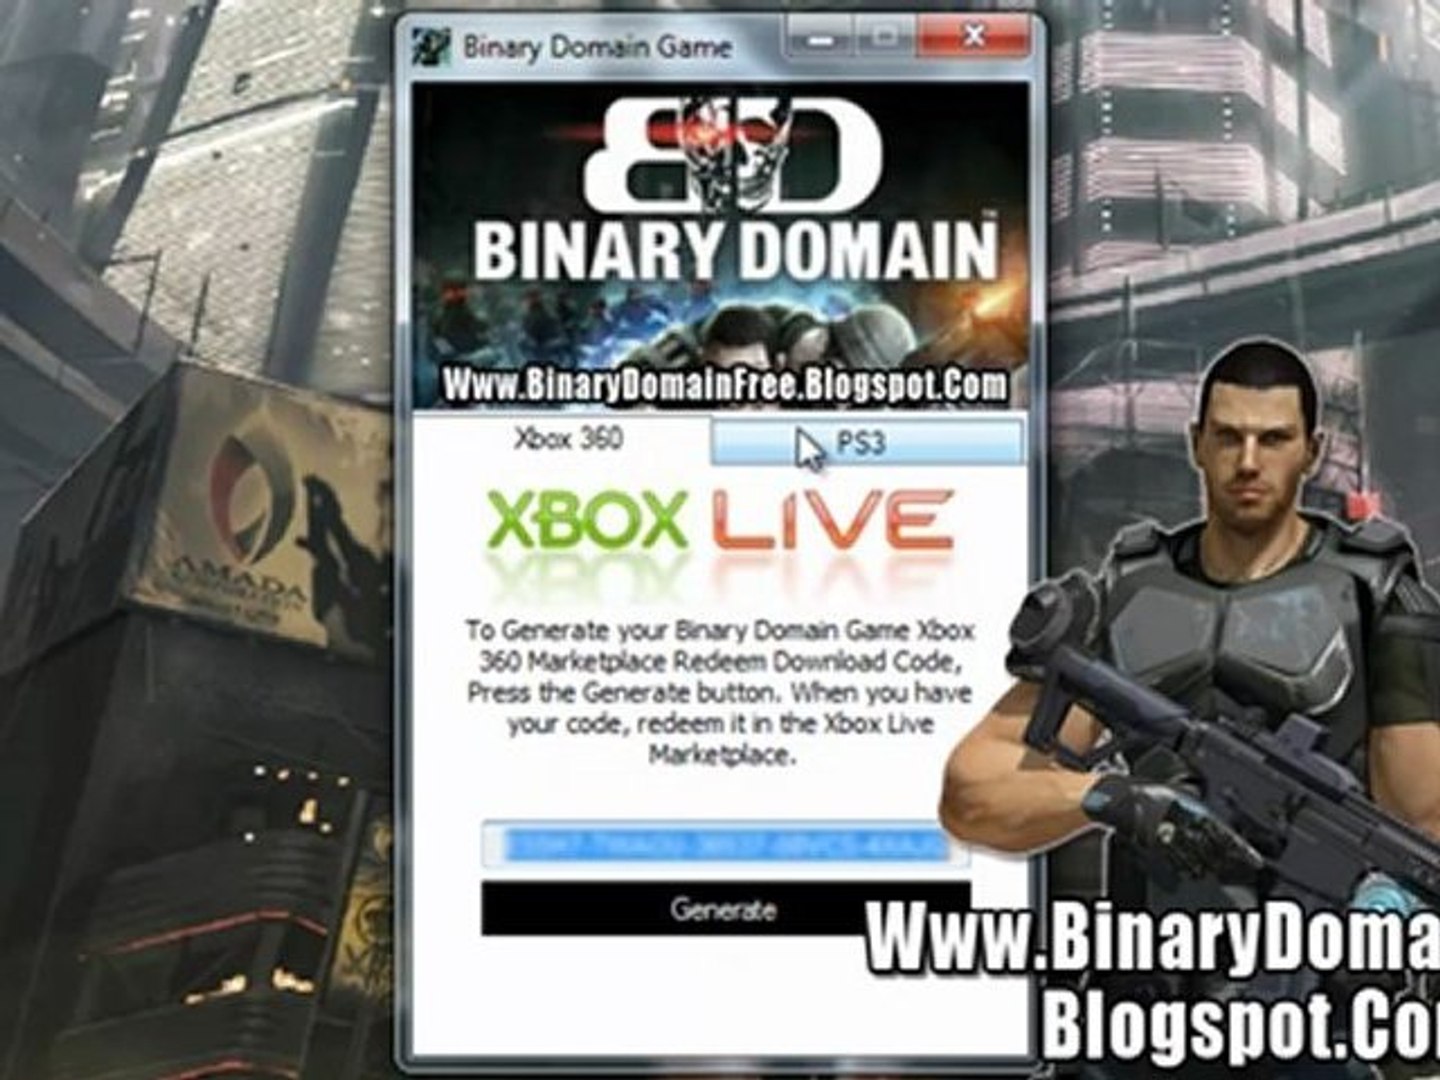 Binary Domain Game Skidrow Crack leaked - Free Download - video Dailymotion